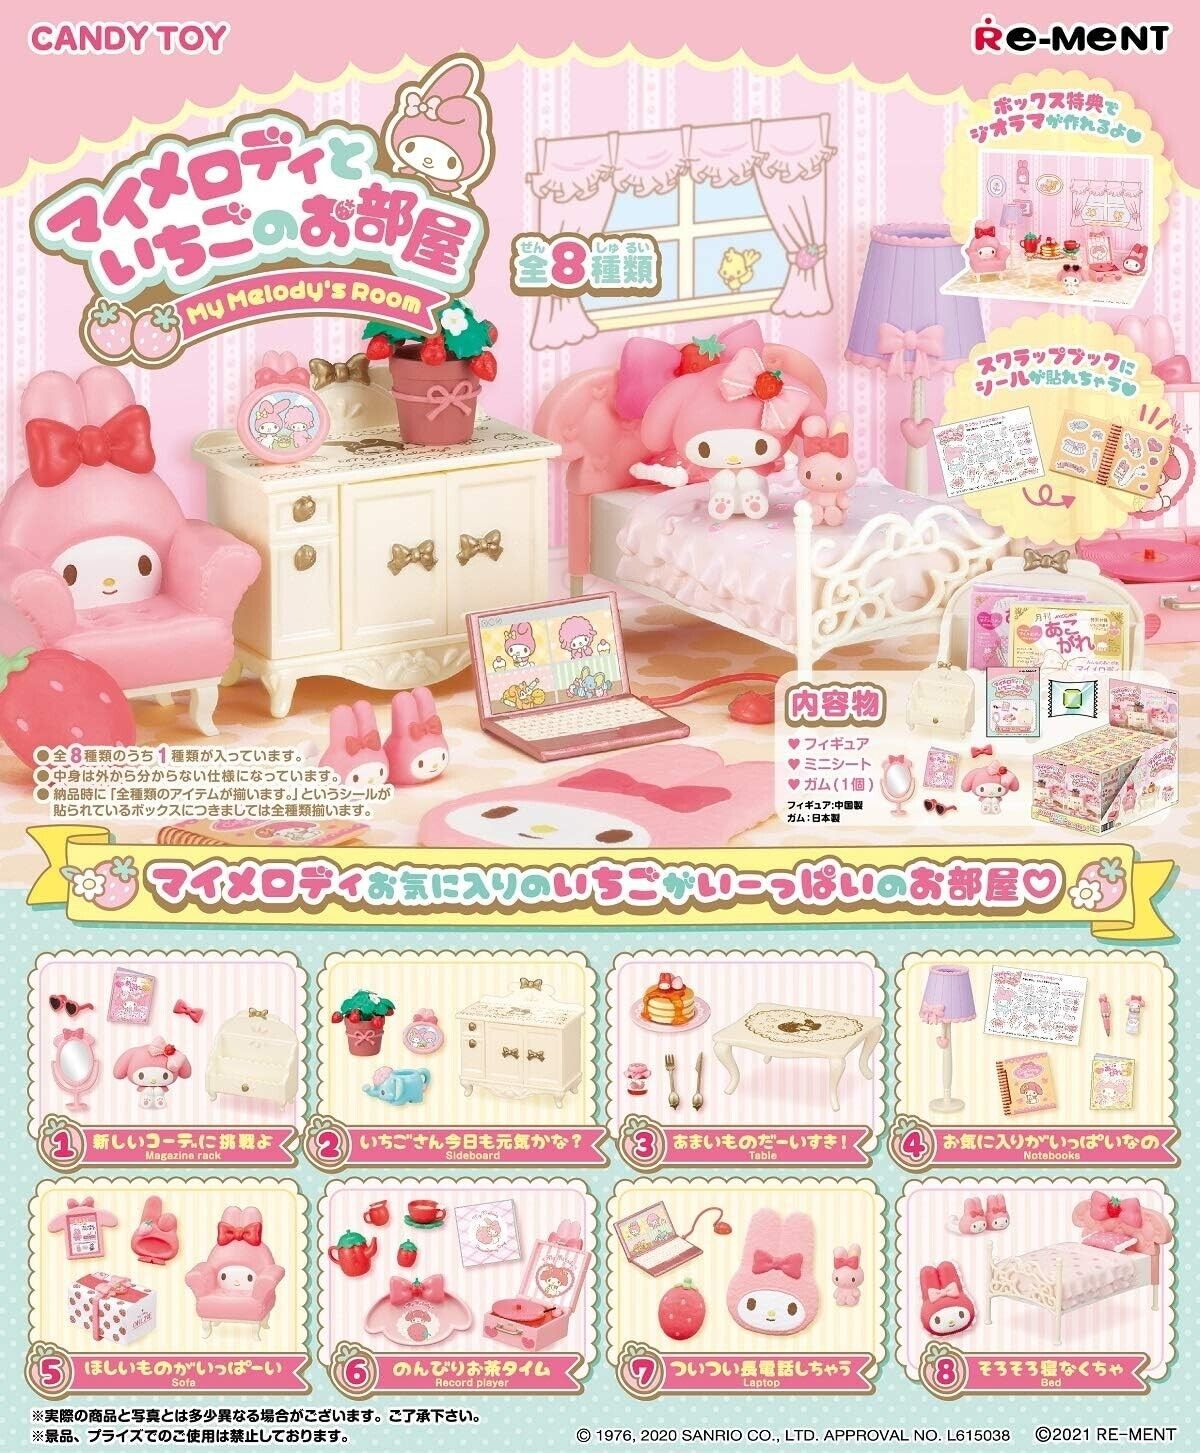 Re-ment Sanrio My Melody's Room Miniature Figure Complete Box Set of 8 NEW